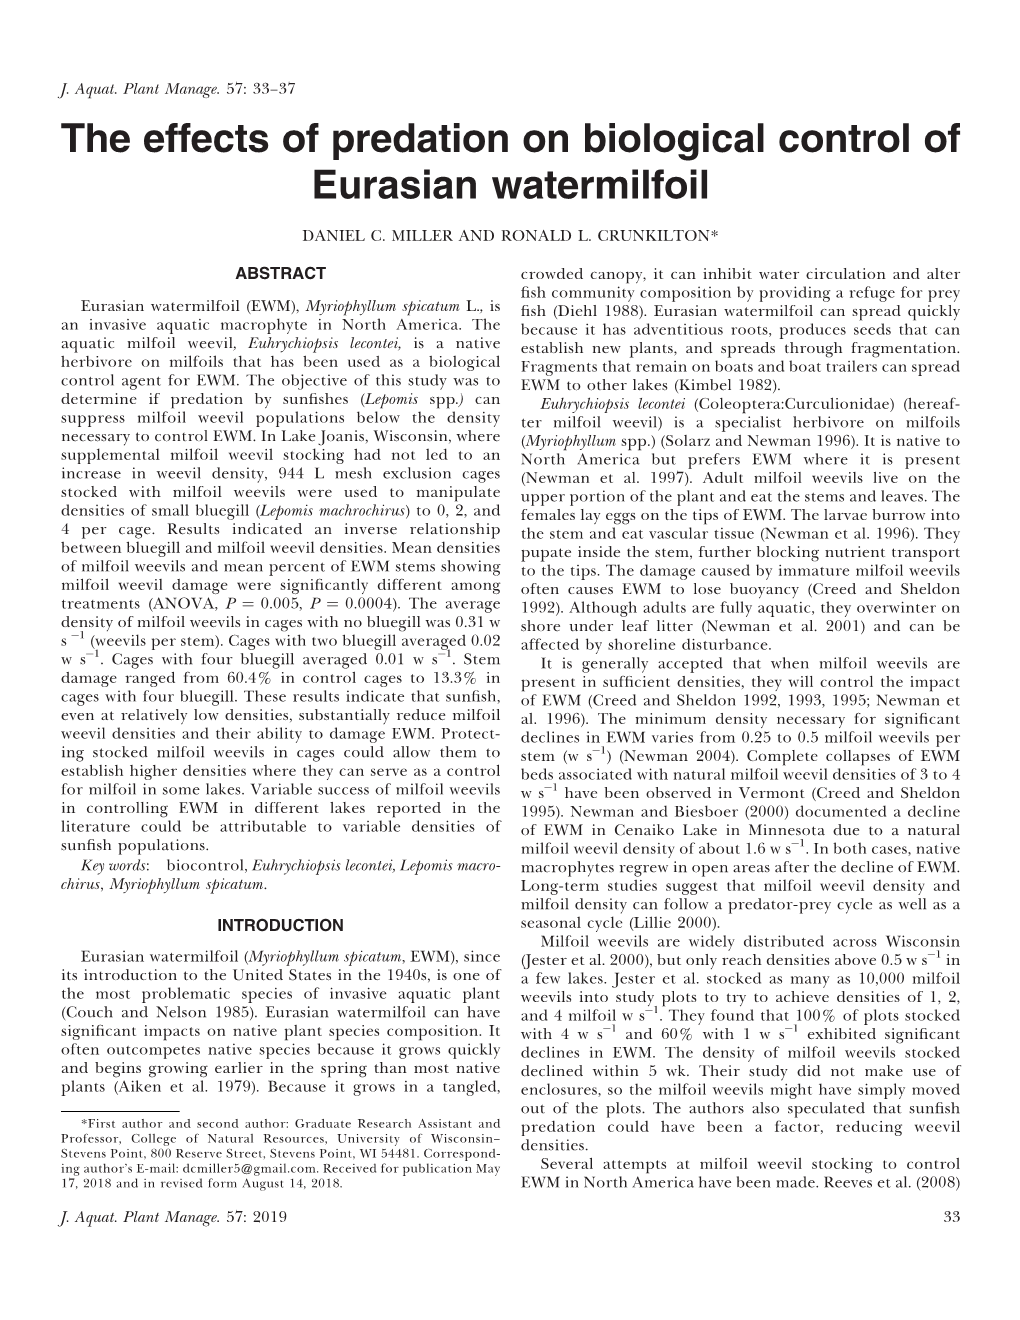 The Effects of Predation on Biological Control of Eurasian Watermilfoil